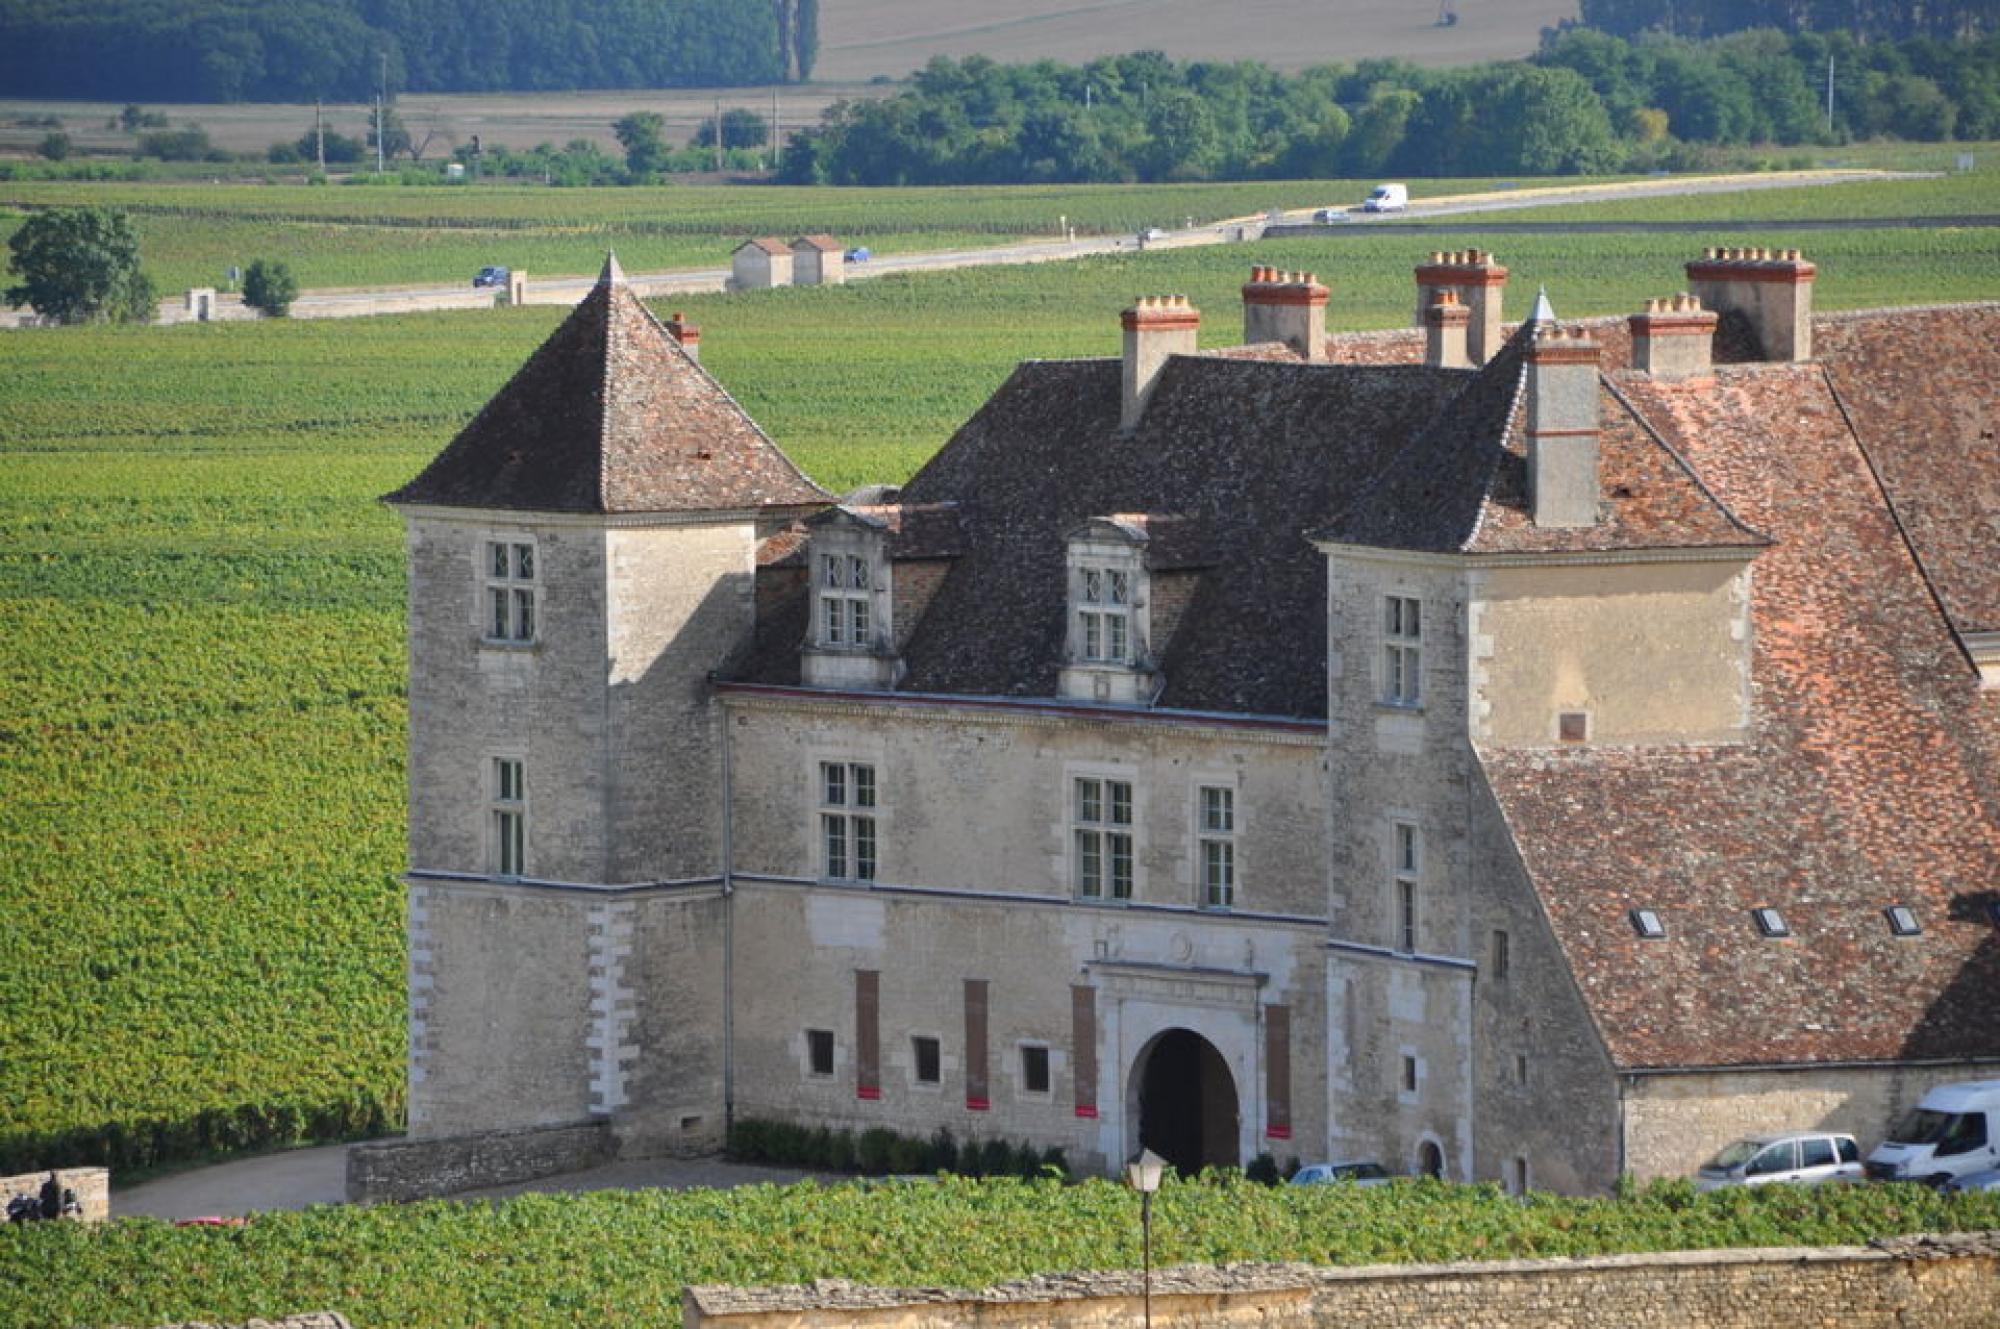 Discover Burgundy - Vacation package : The High Life  - Land of France, travel agency in France